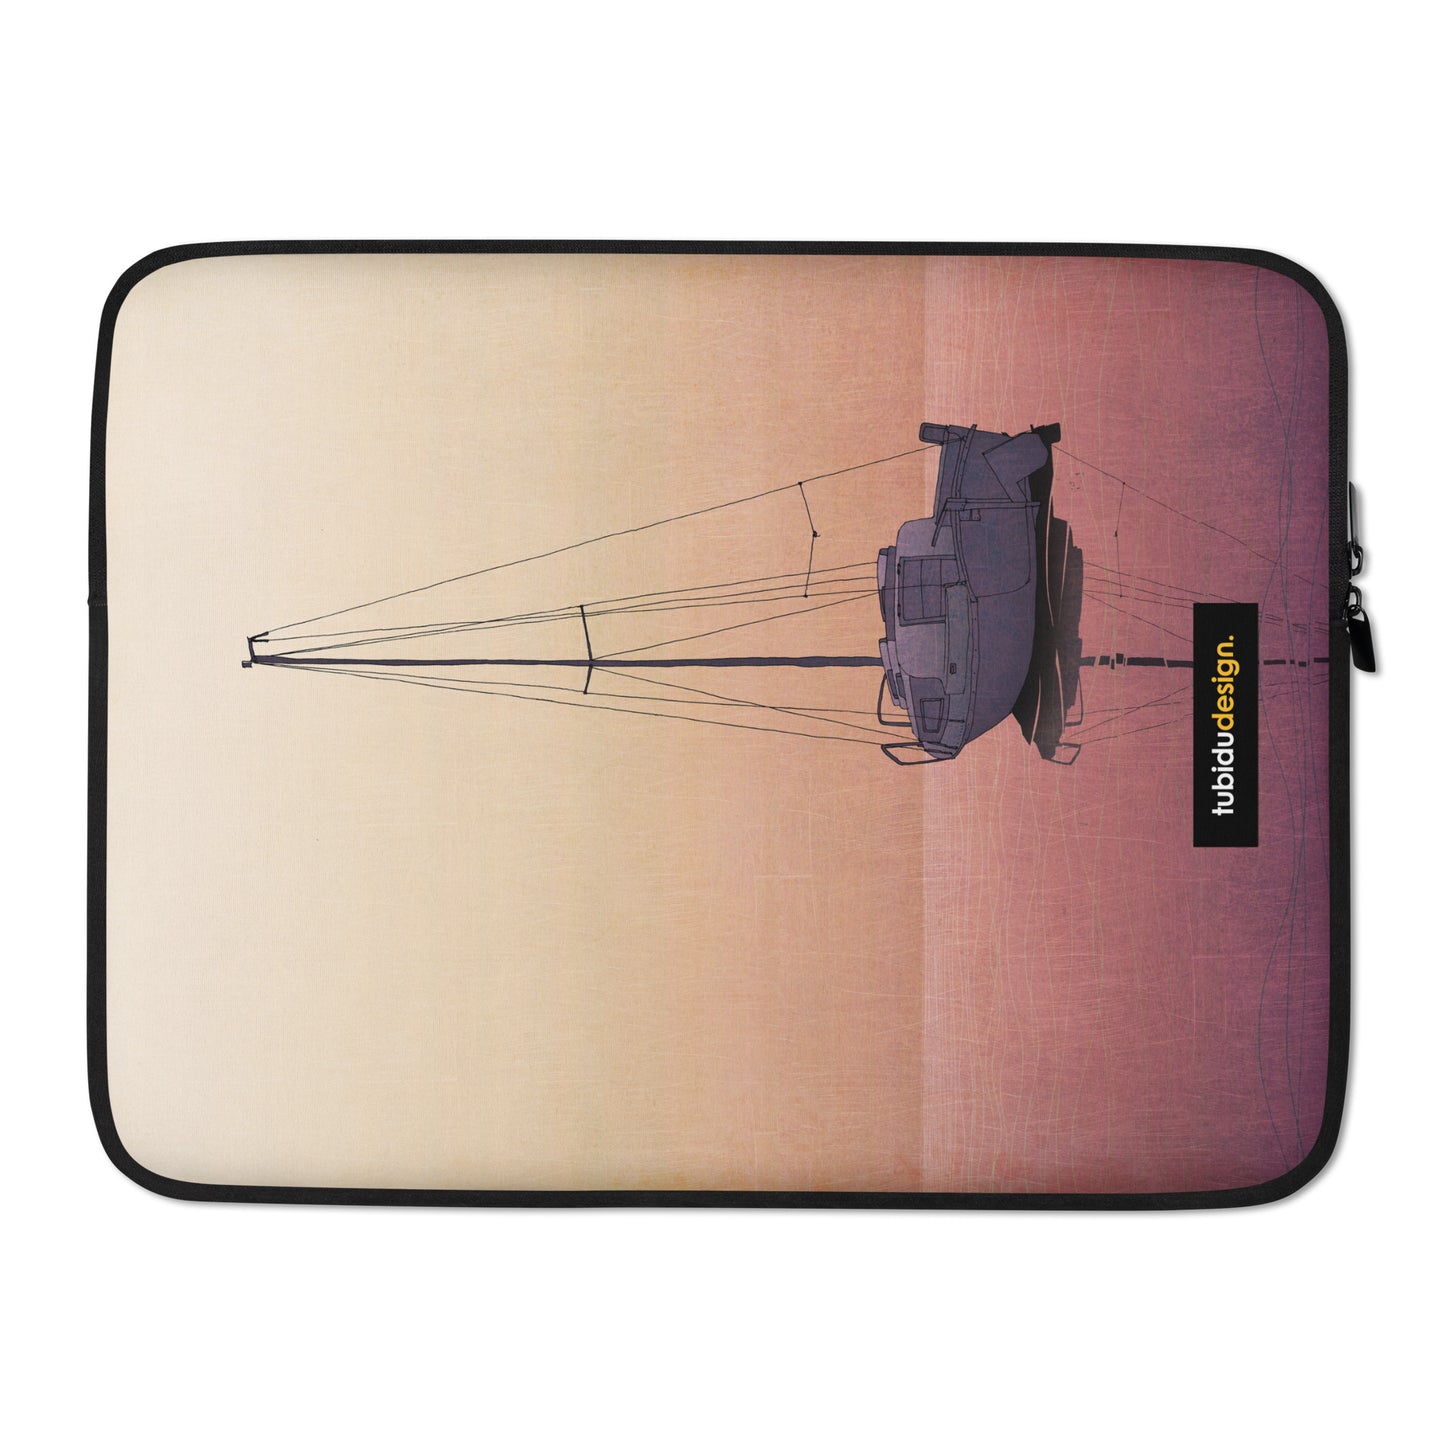 Calm waters - Illustrated Laptop Sleeve